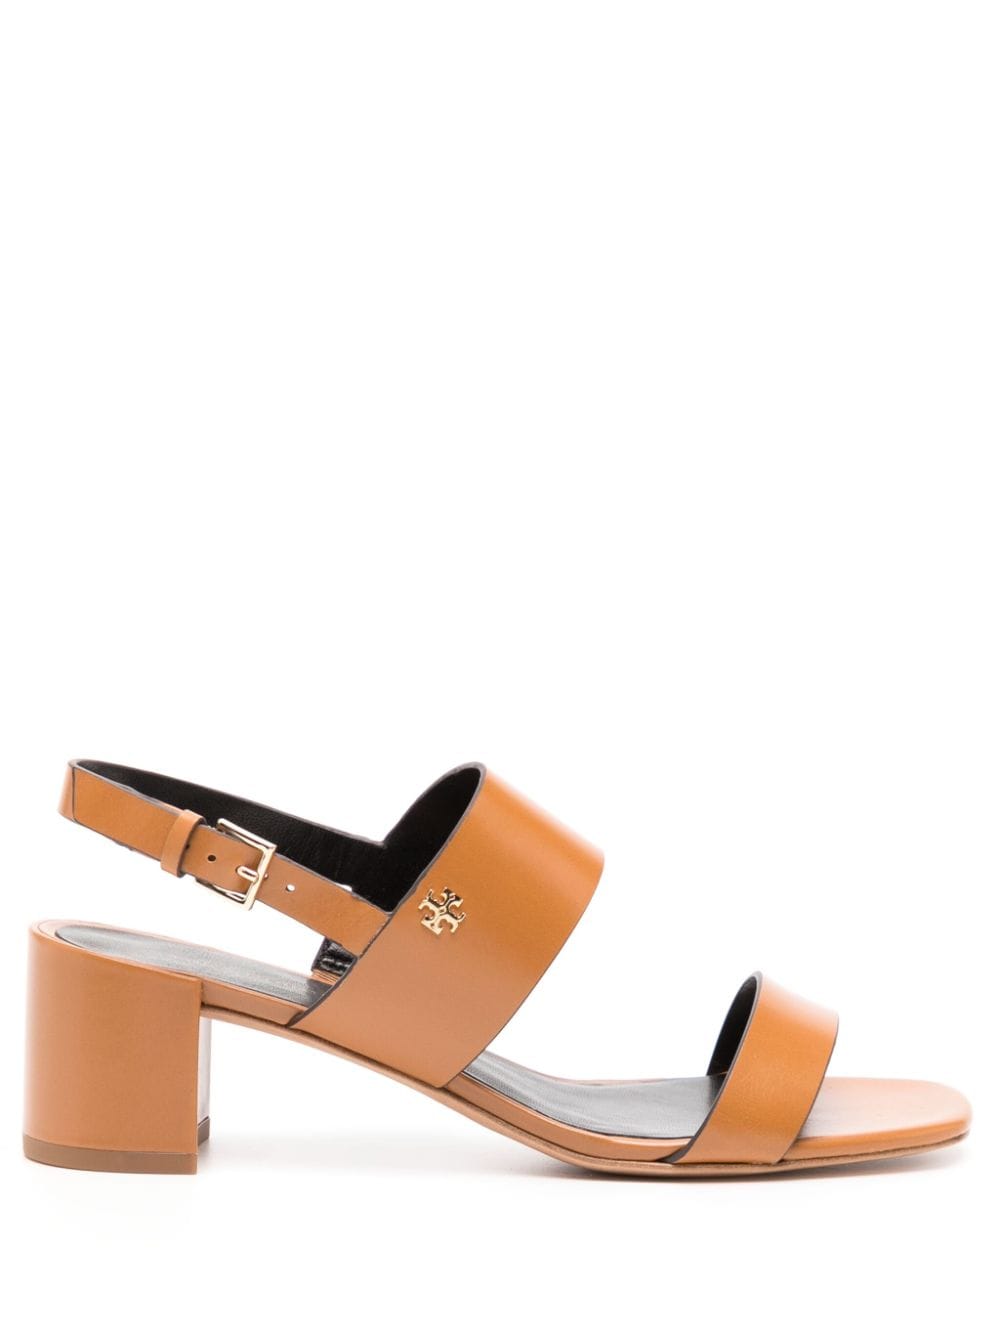 Tory Burch Double T 50mm leather sandals - Brown von Tory Burch